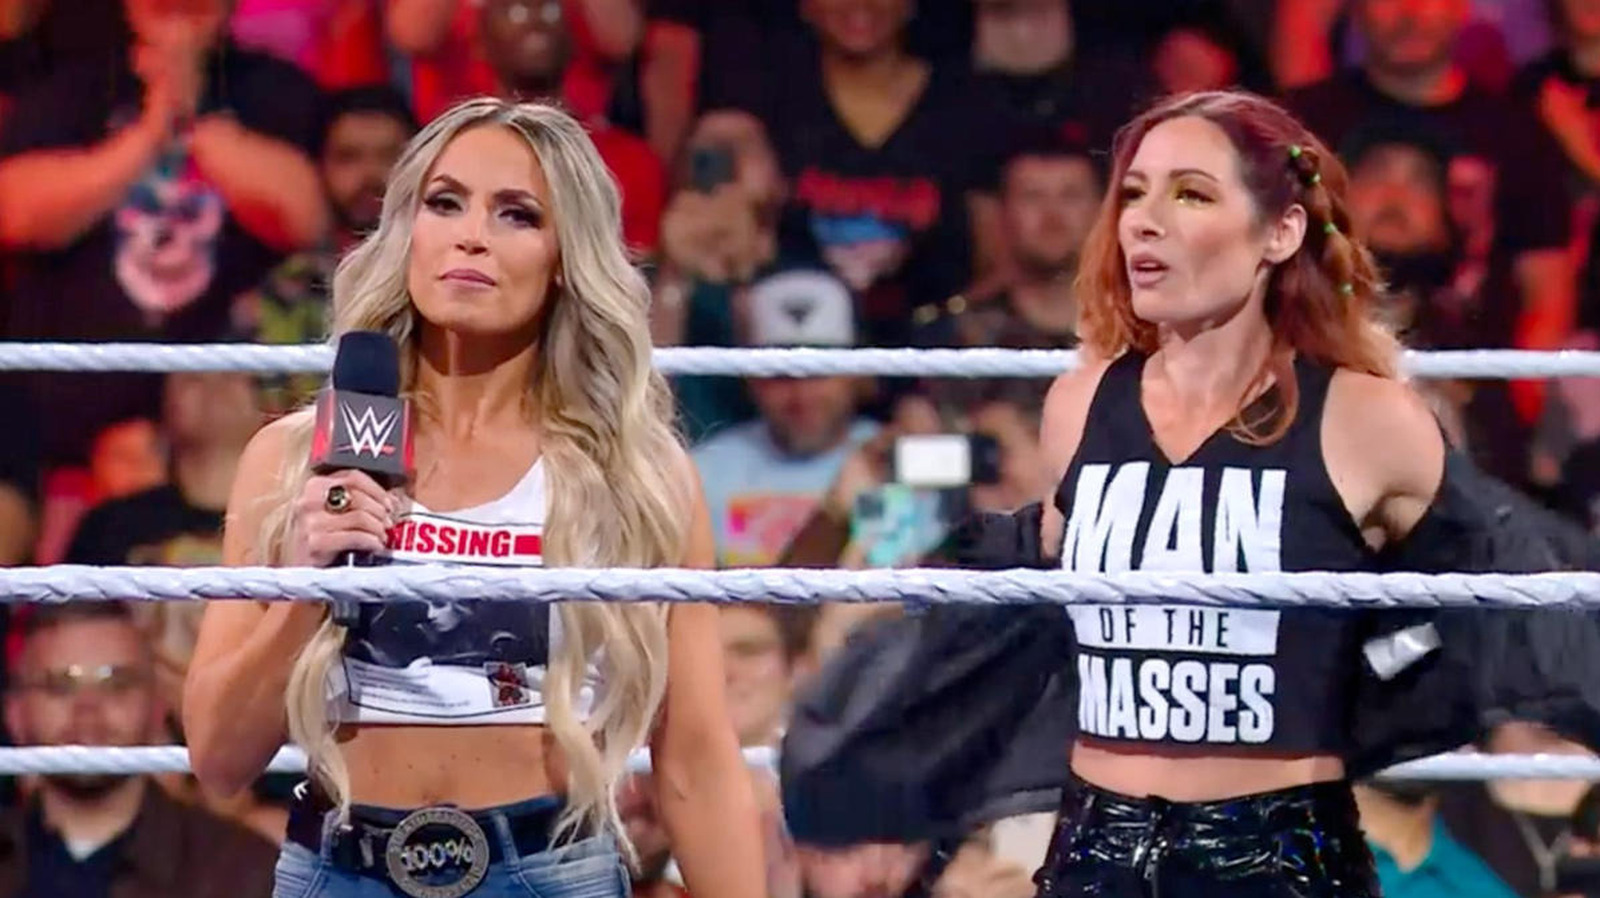 WWE Raw Preview 8/14: Becky Lynch Vs. Trish Stratus, More